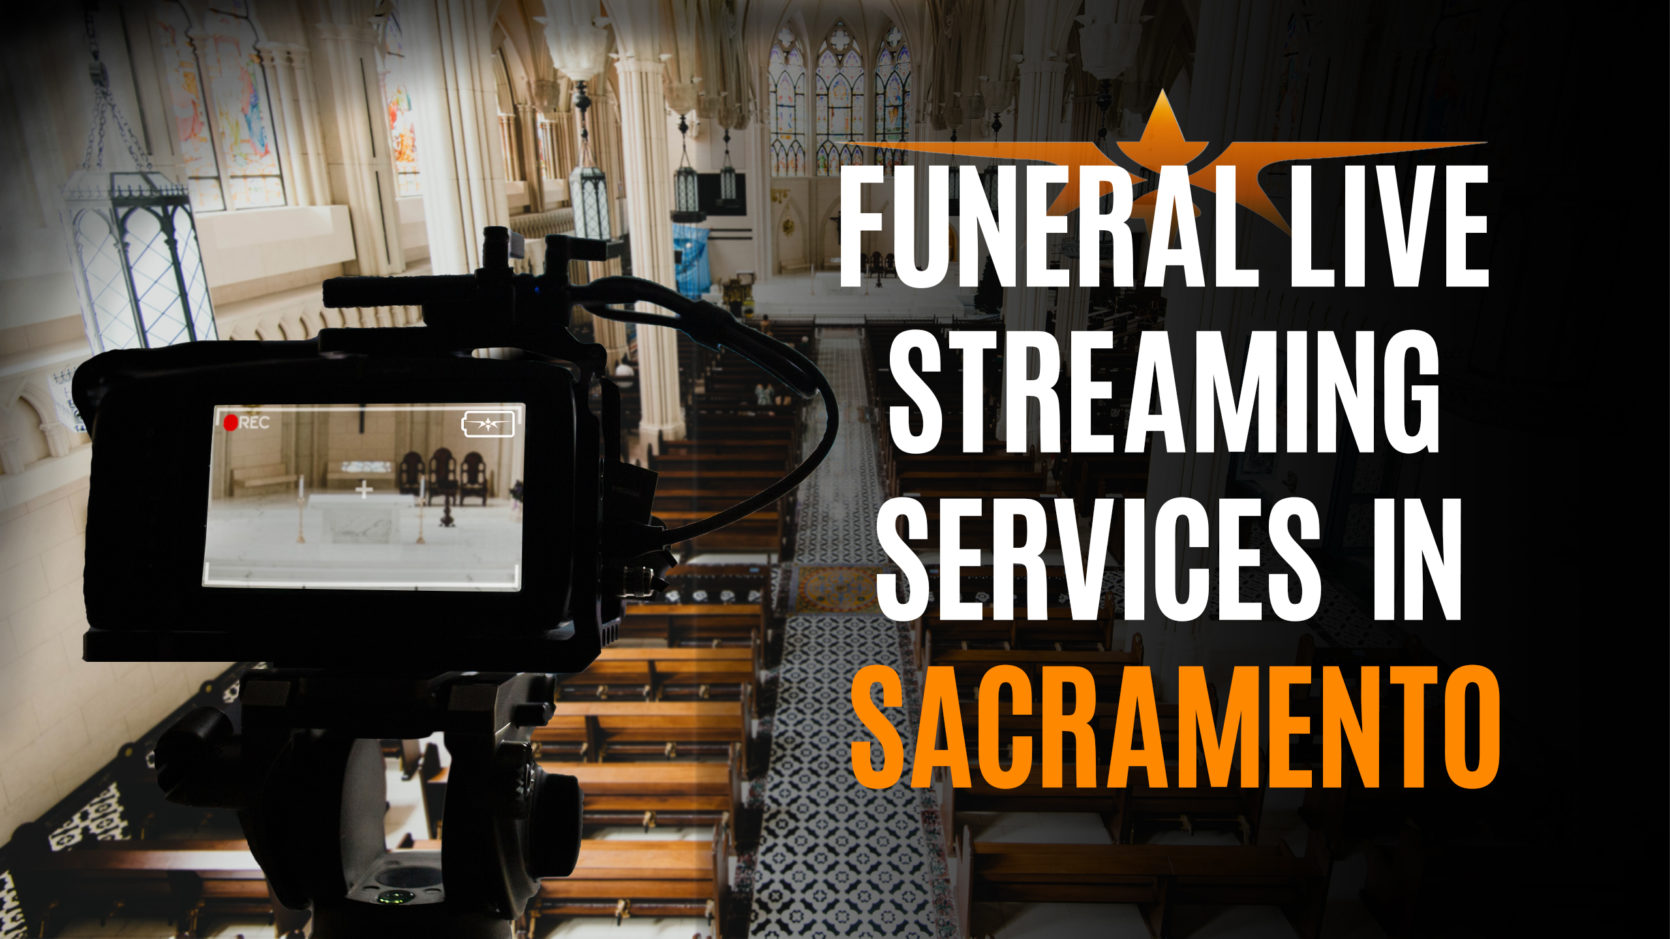 Funeral Live Streaming Services in Sacramento